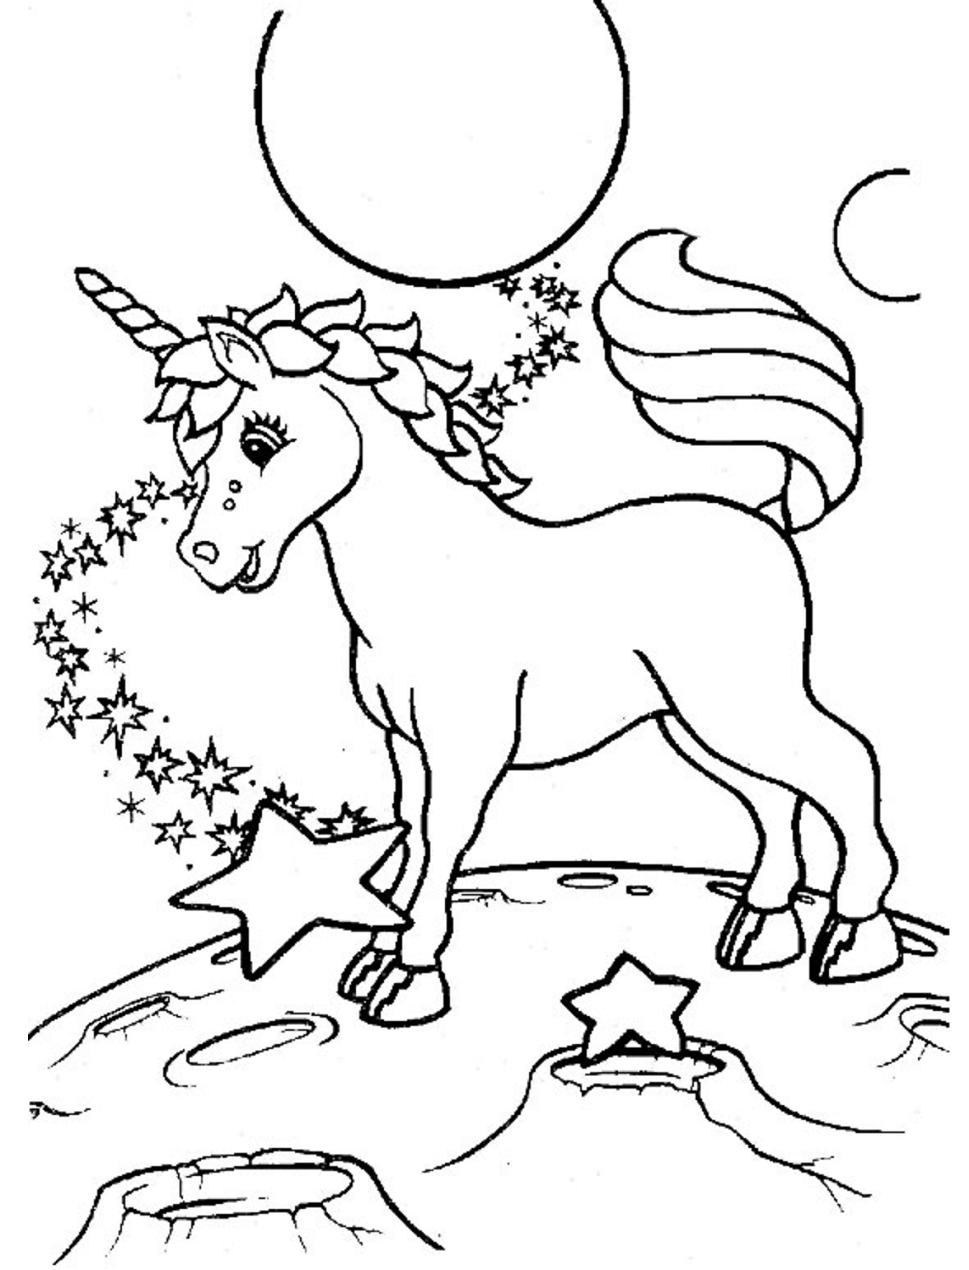 unicorn in lisa frank coloring page free printable coloring pages for kids